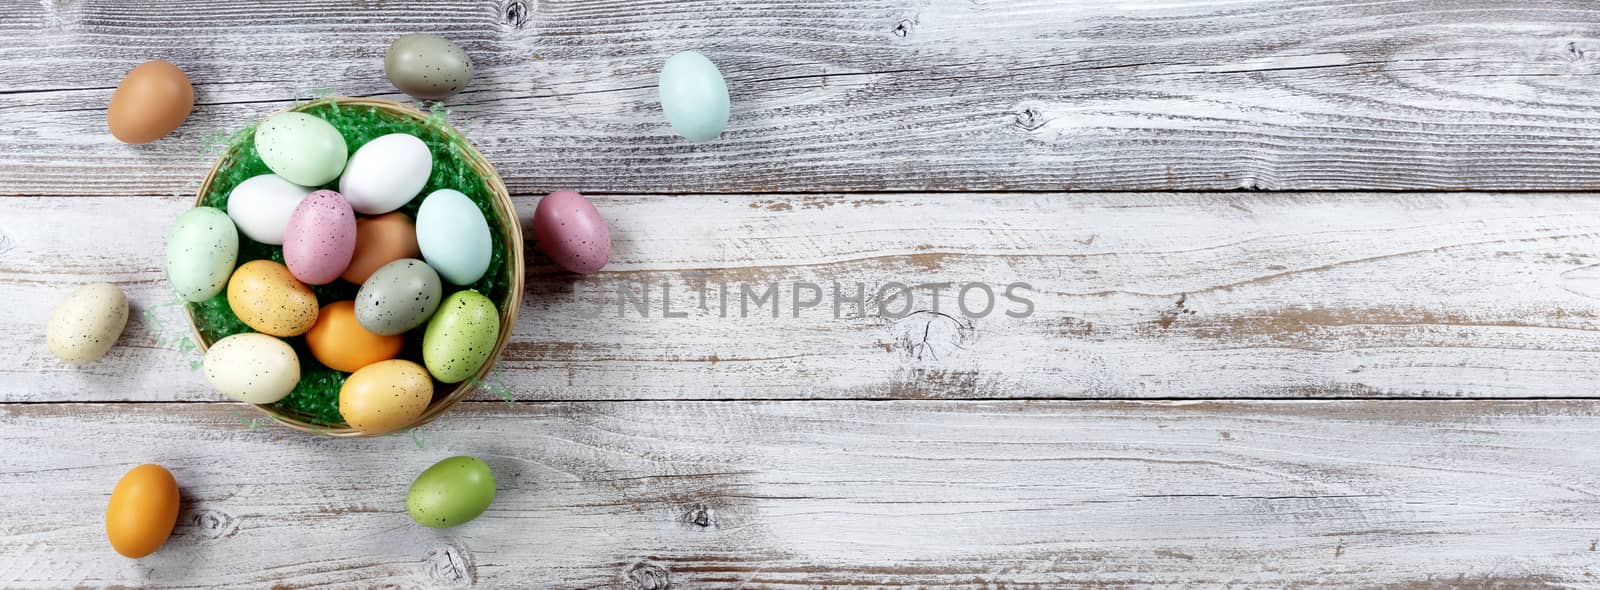 Happy Easter holiday with basket filled of colorful eggs on white rustic wood. Overhead view with plenty of copy space 